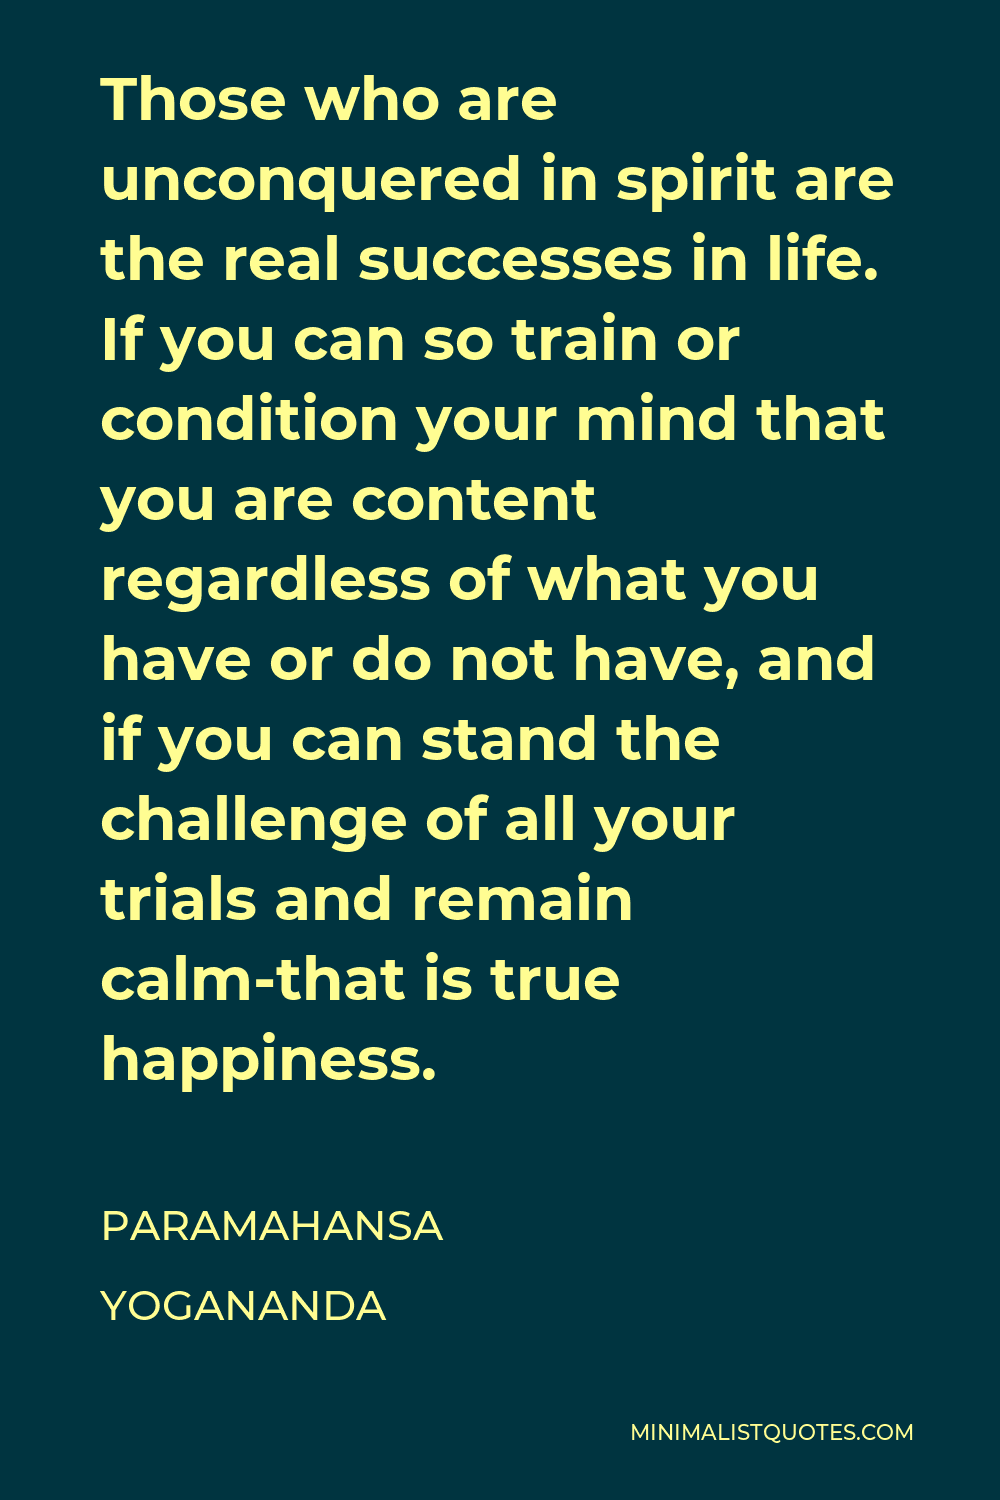 Paramahansa Yogananda Quote - Those who are unconquered in spirit are the real successes in life. If you can so train or condition your mind that you are content regardless of what you have or do not have, and if you can stand the challenge of all your trials and remain calm-that is true happiness.